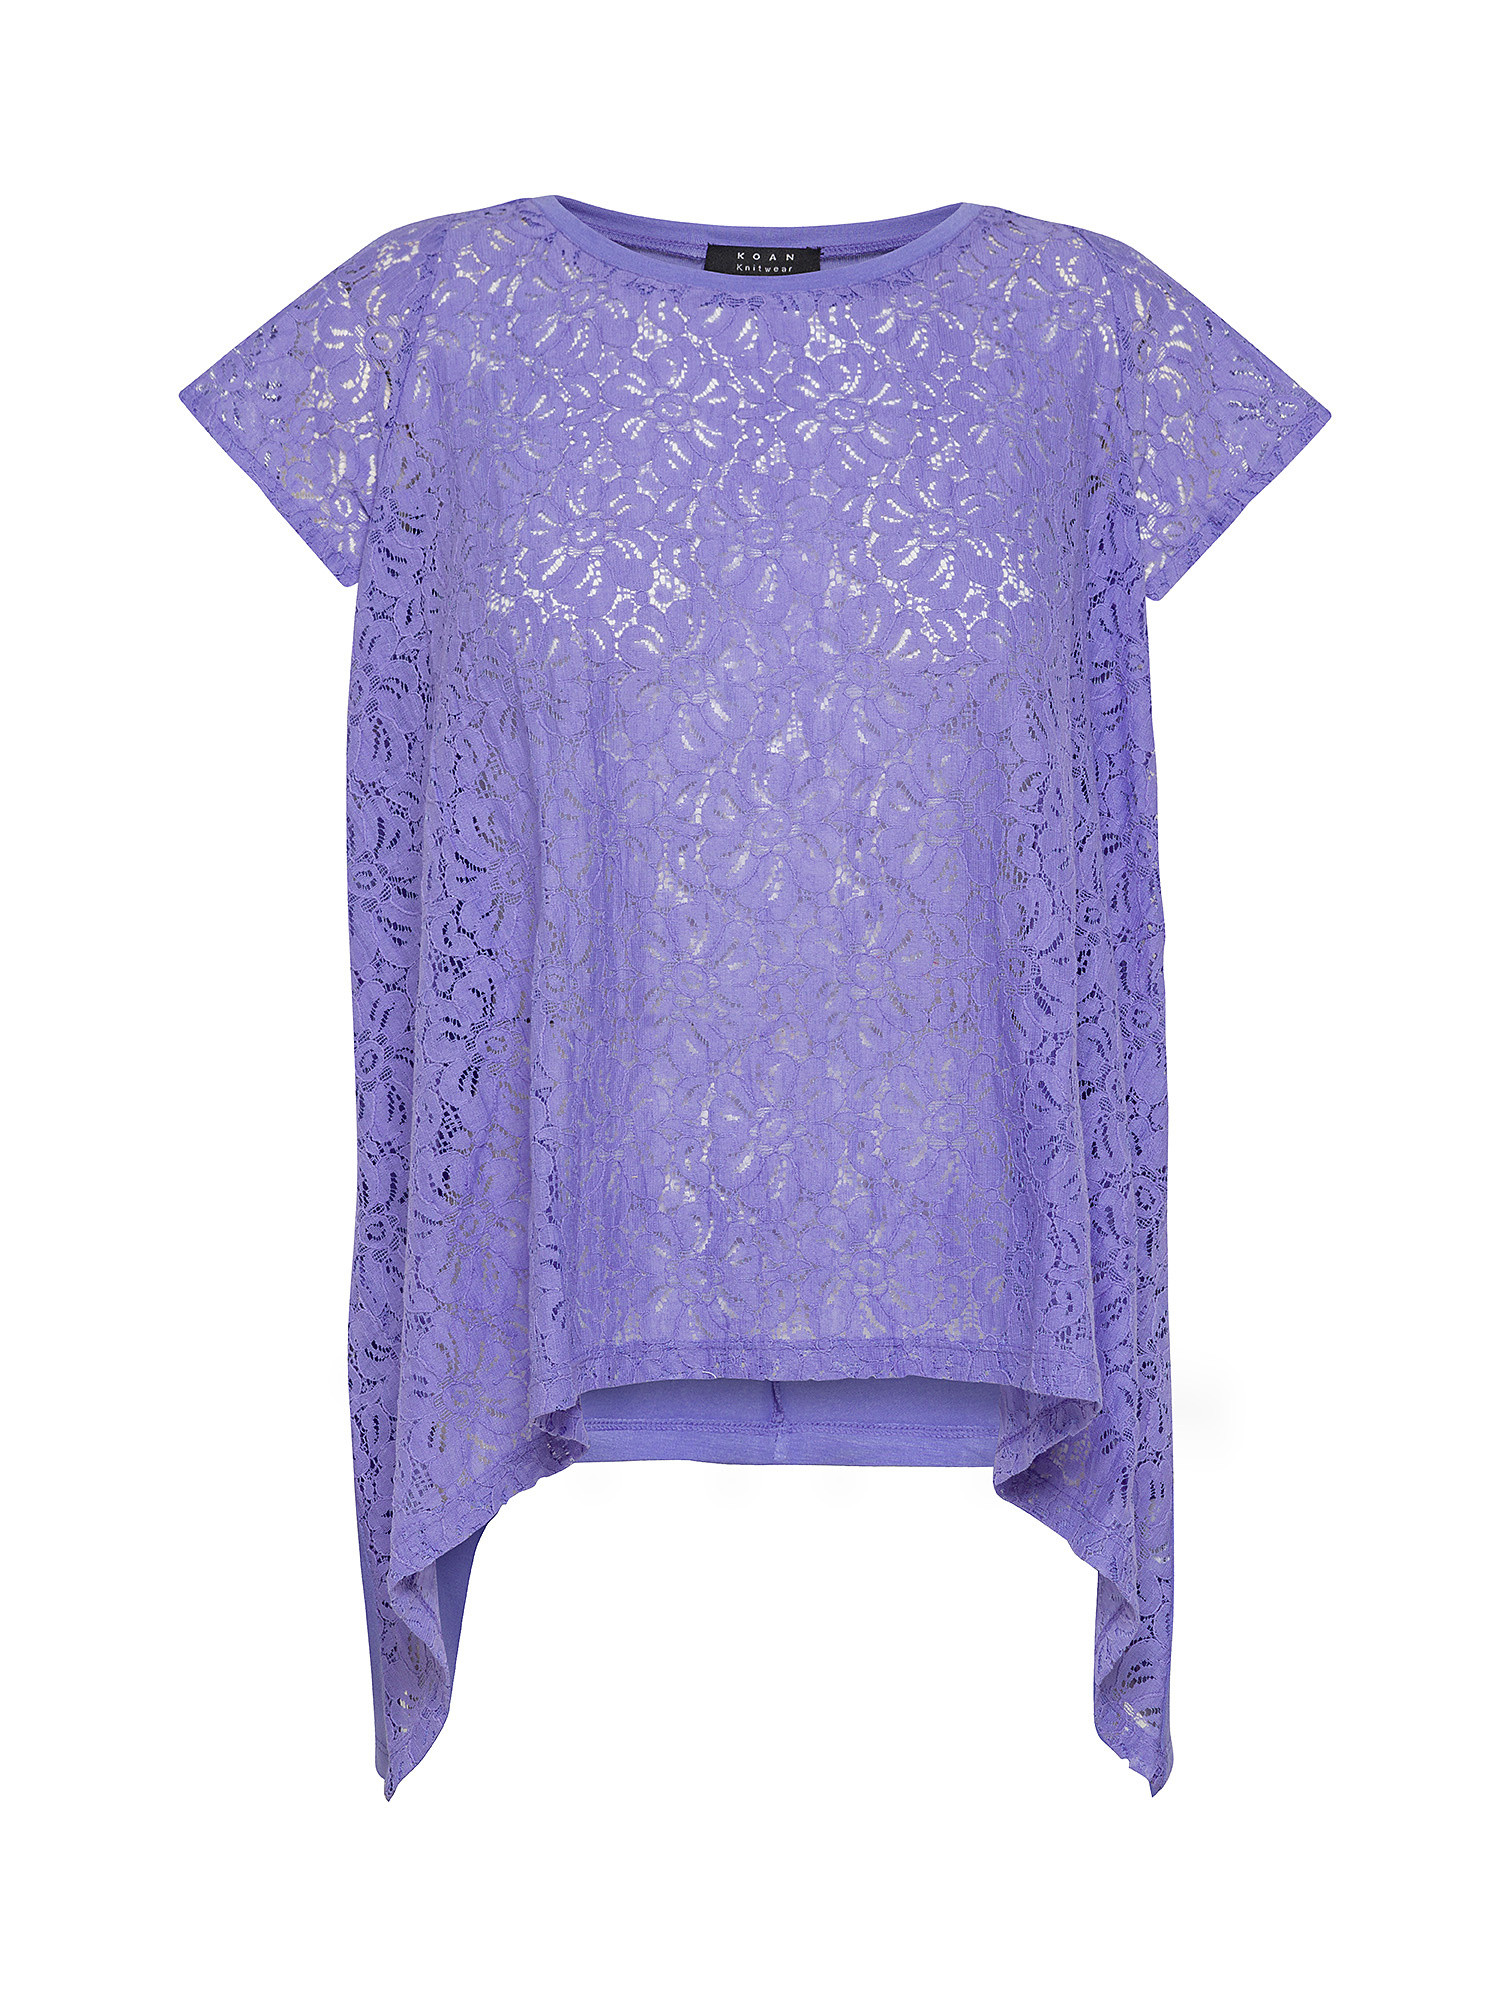 Koan - Flared T-shirt with lace, Purple Lilac, large image number 0